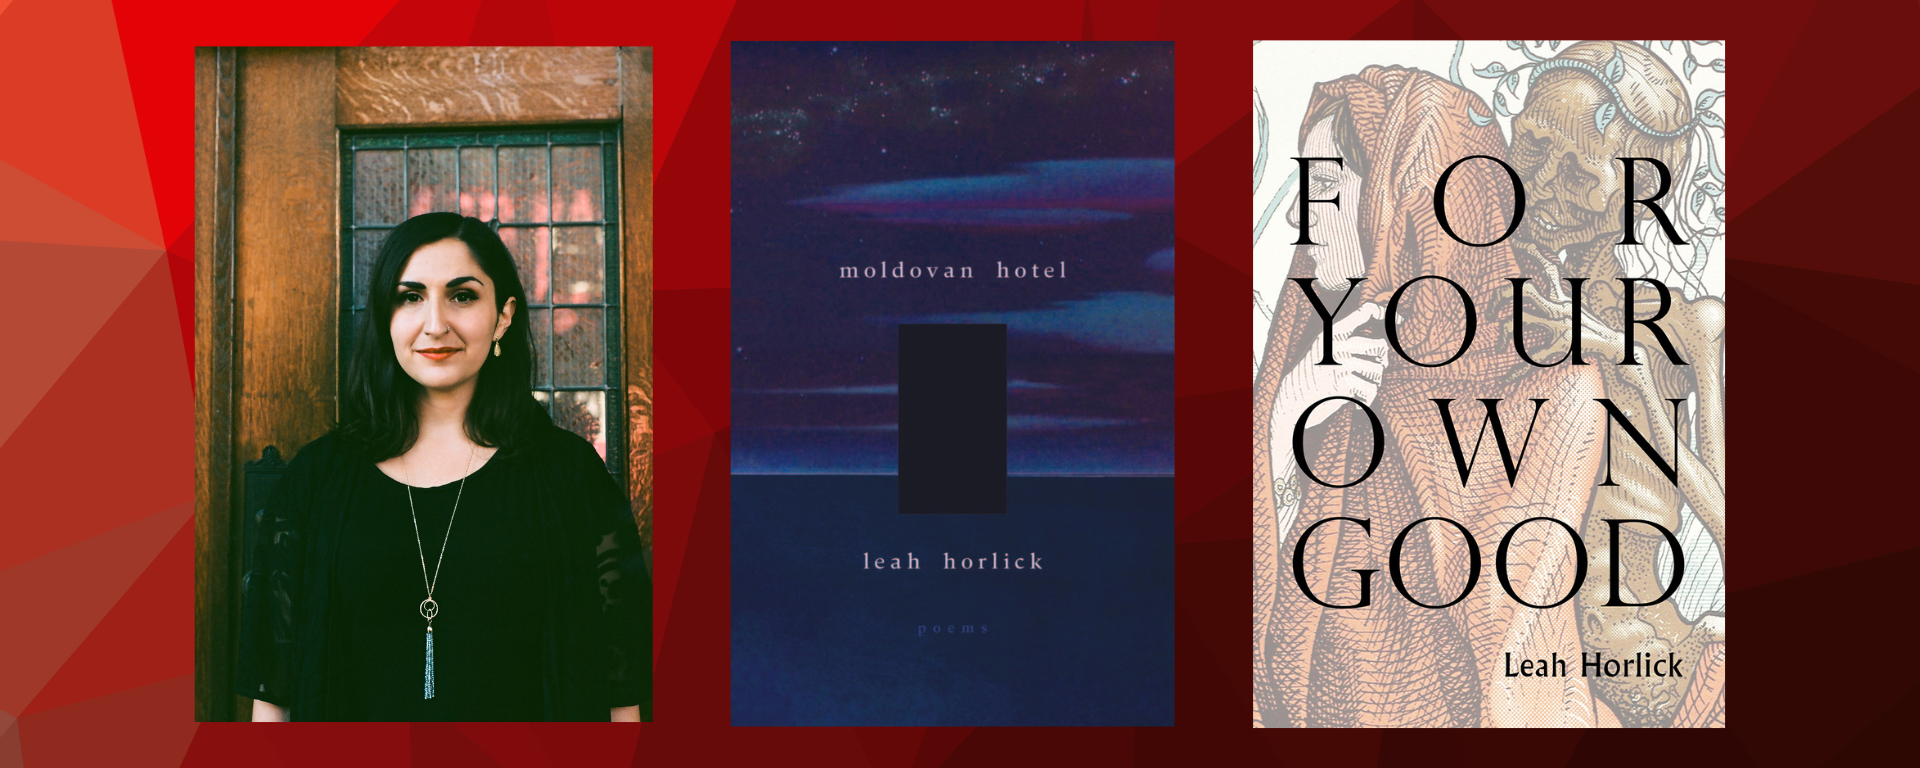 A photo of writer Leah Horlick is show alongside the cover art for her two most recent poetry collections, Moldovan Hotel, and For Your Own Good. The images are displayed against a red background. Leah smile softly towards the camera with her dark her loose, wearing a black shirt, red lipstick, and gold earrings.